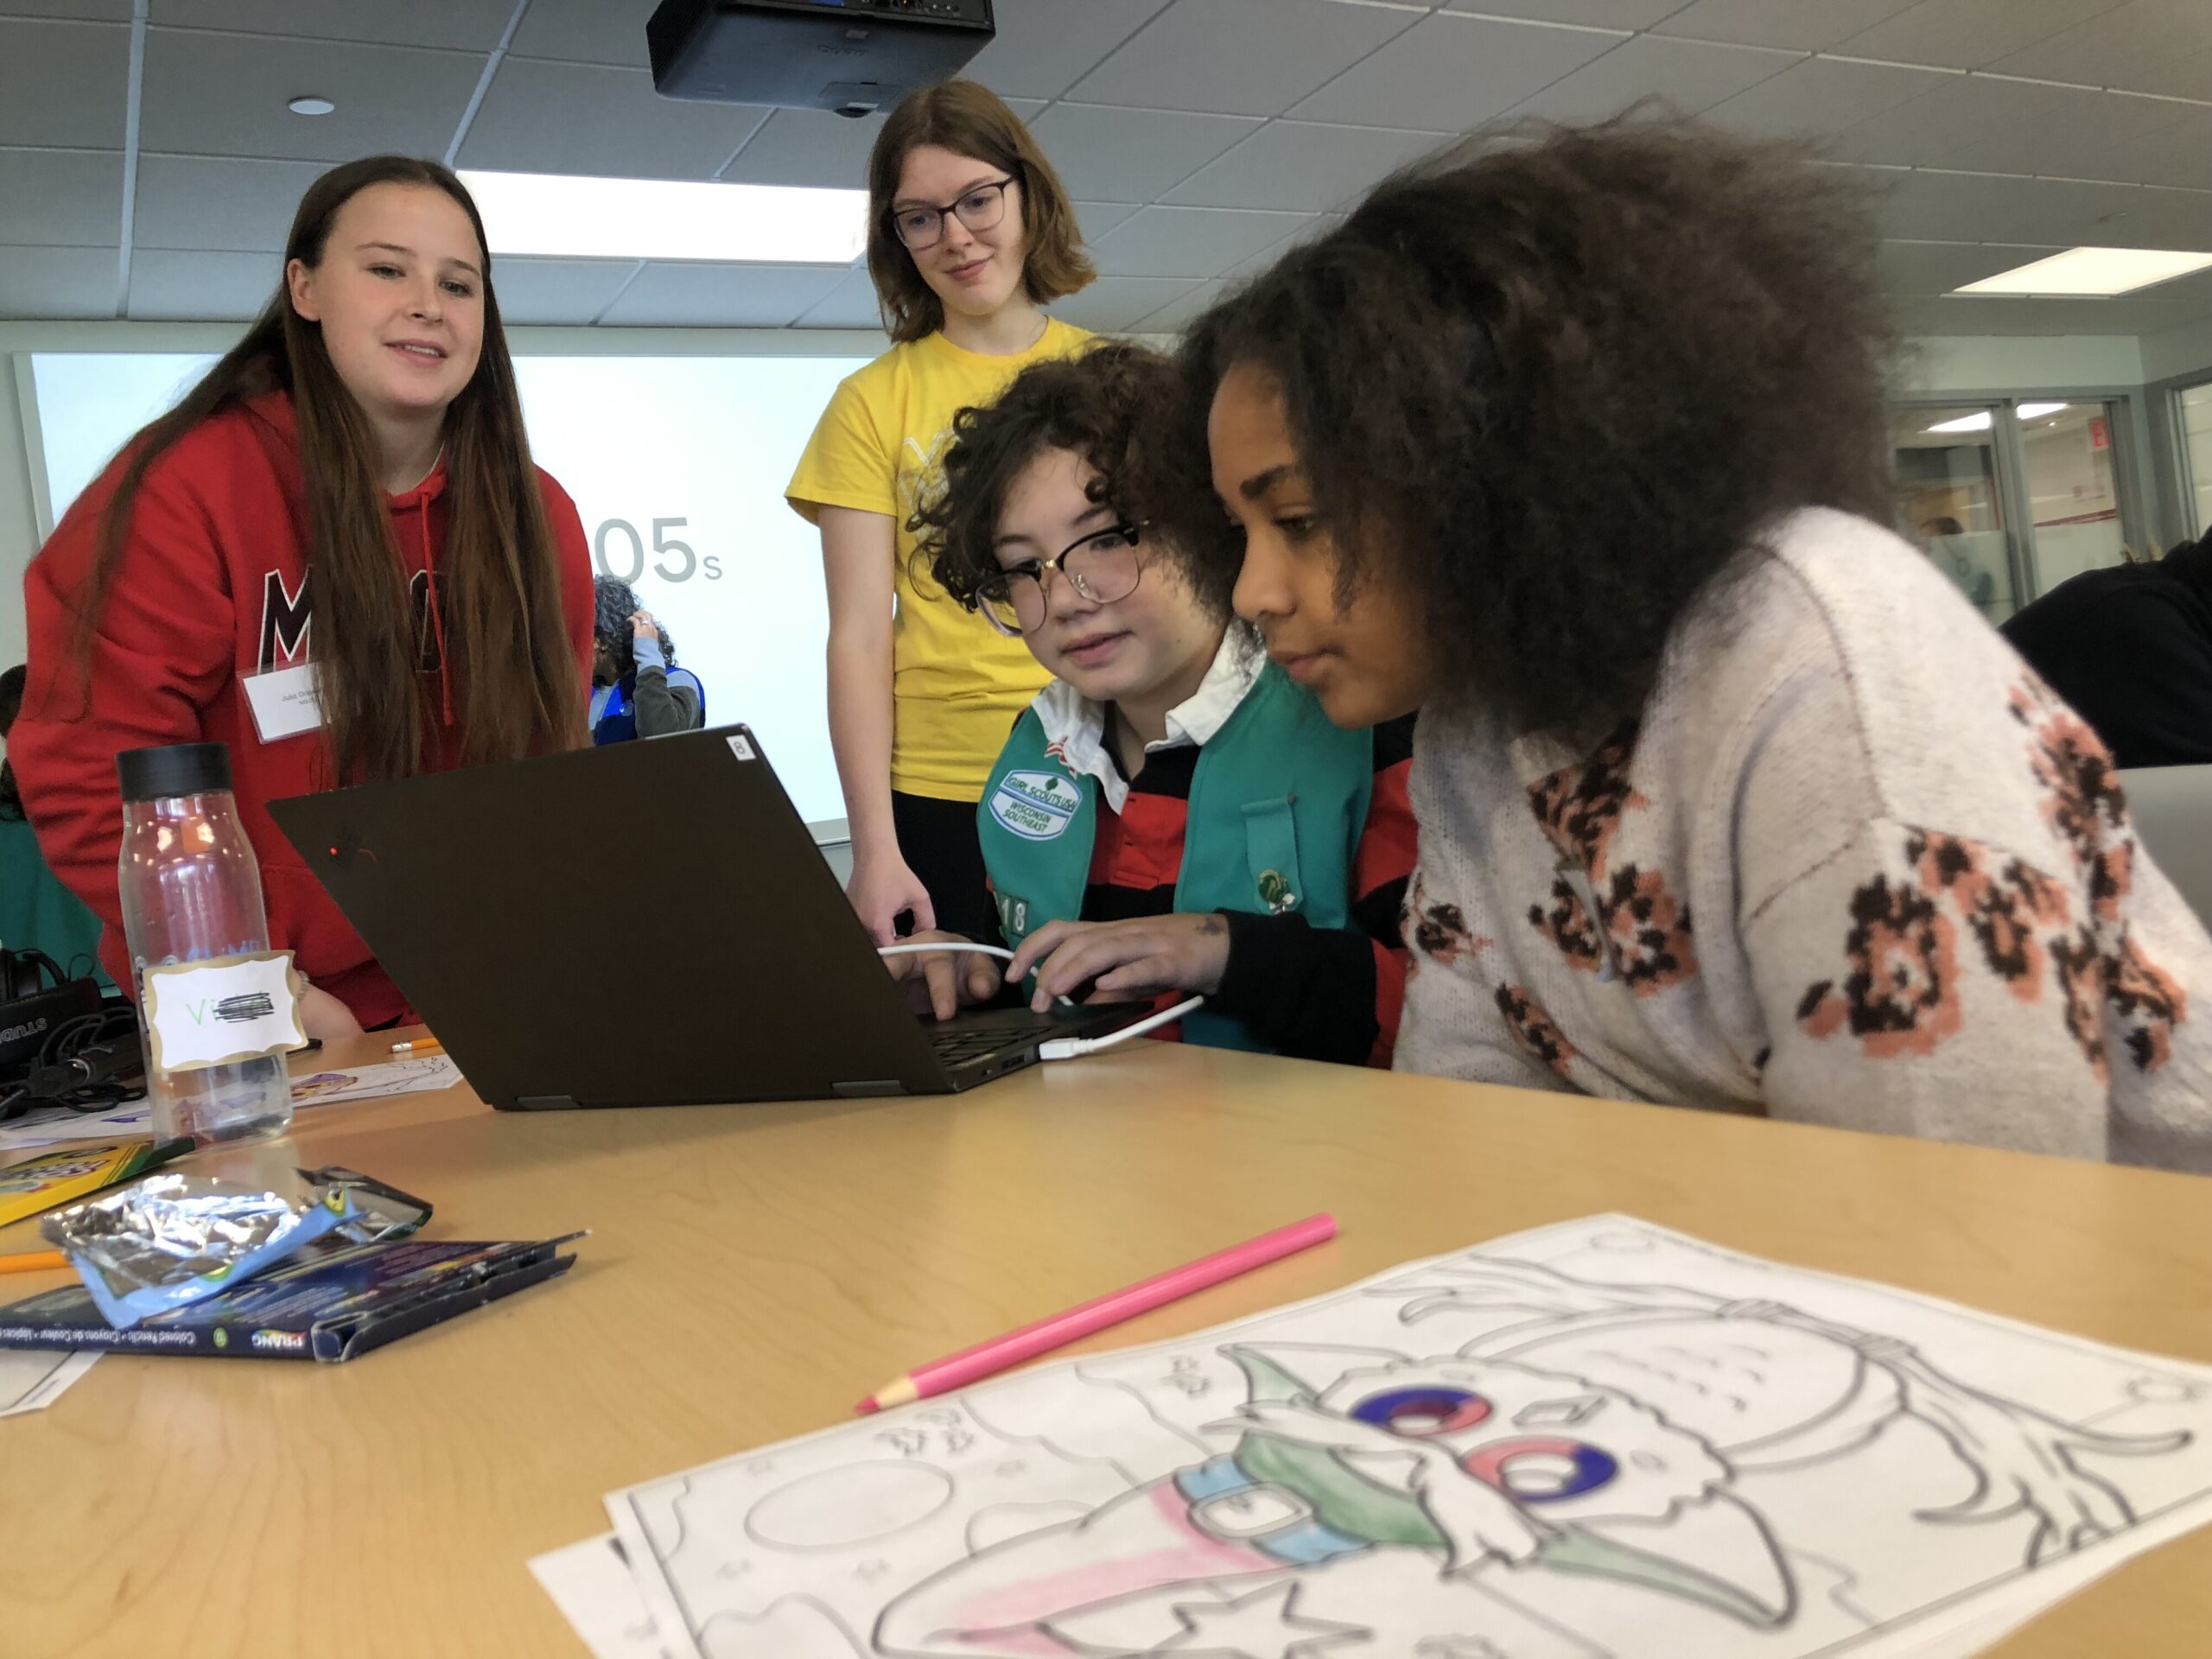 Girls’ interest in computing declines after middle school. This Milwaukee partnership aims to instill a love of STEM.